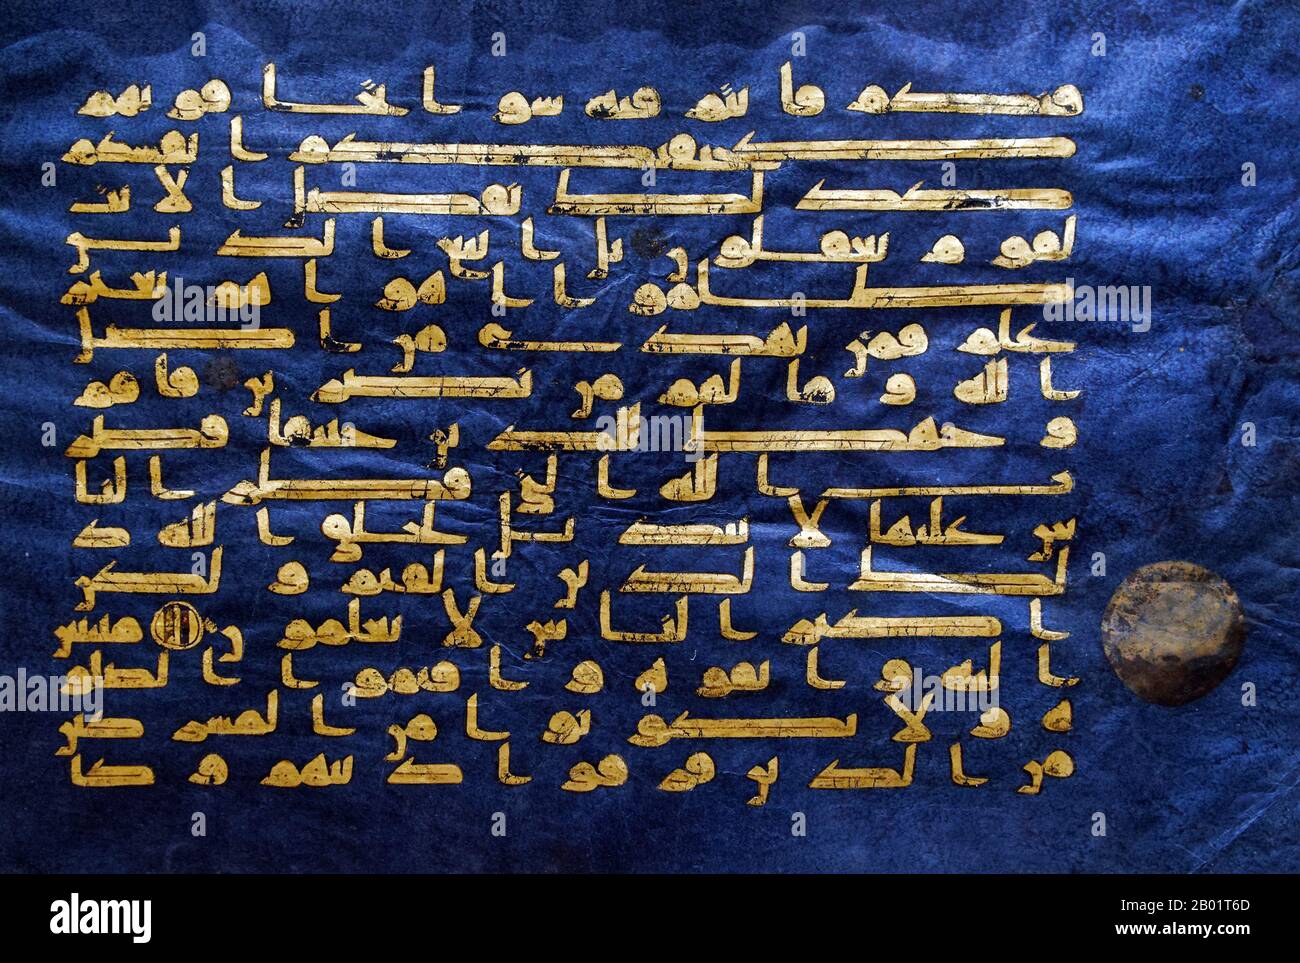 Tunisia: Surat Al-Rum ('Sura of the Romans'), in Kufic script. From the 'Blue Qur'an', Qairawan, Tunisia, c. 1000 CE.  The Blue Qur'an is a late 9th - early 10th century Tunisian Qur'an manuscript in Kufic calligraphy. It is written in gold (chrysography) on parchment died with indigo, a unique aspect. It is among the most famous works of Islamic art, and has been called 'one of the most extraordinary luxury manuscripts ever created'.  The manuscript was dispersed during the Ottoman period; today most of it is located in the National Institute of Art and Archaeology in Tunis. Stock Photo